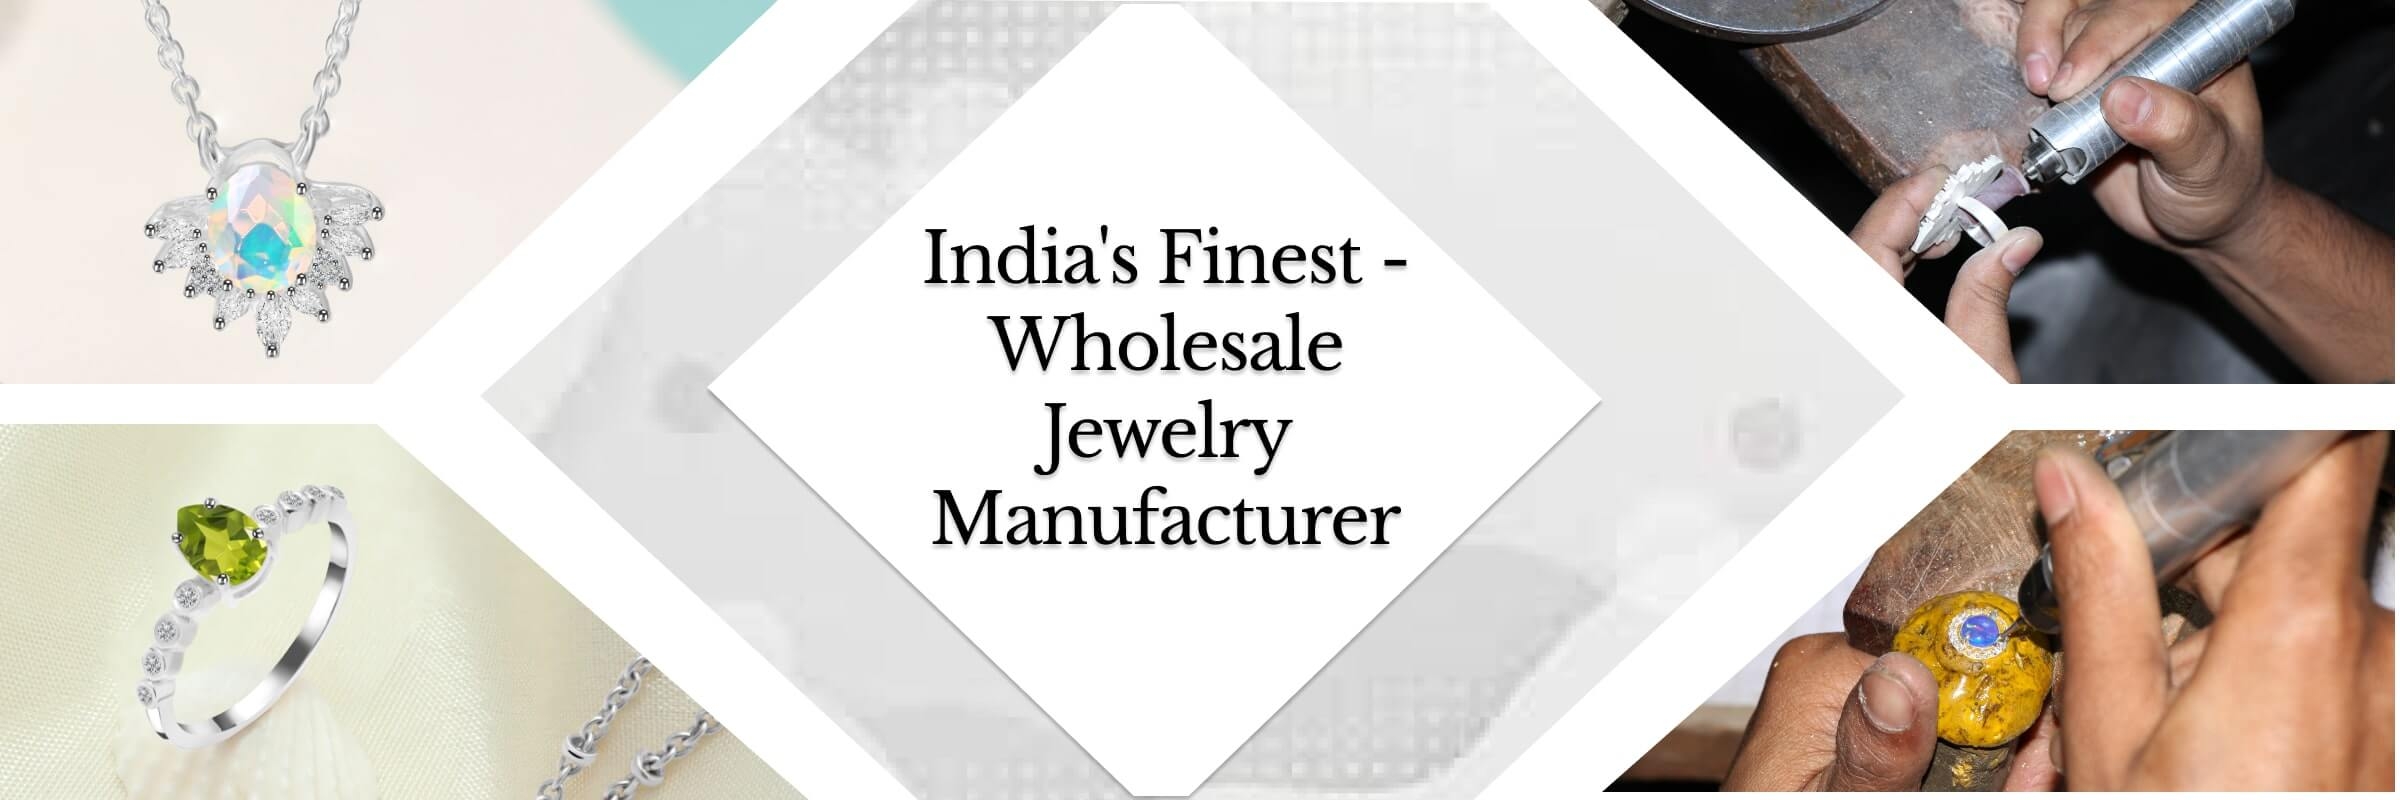 Wholesale Jewelry Manufacturer India - Crafting Finest Creations